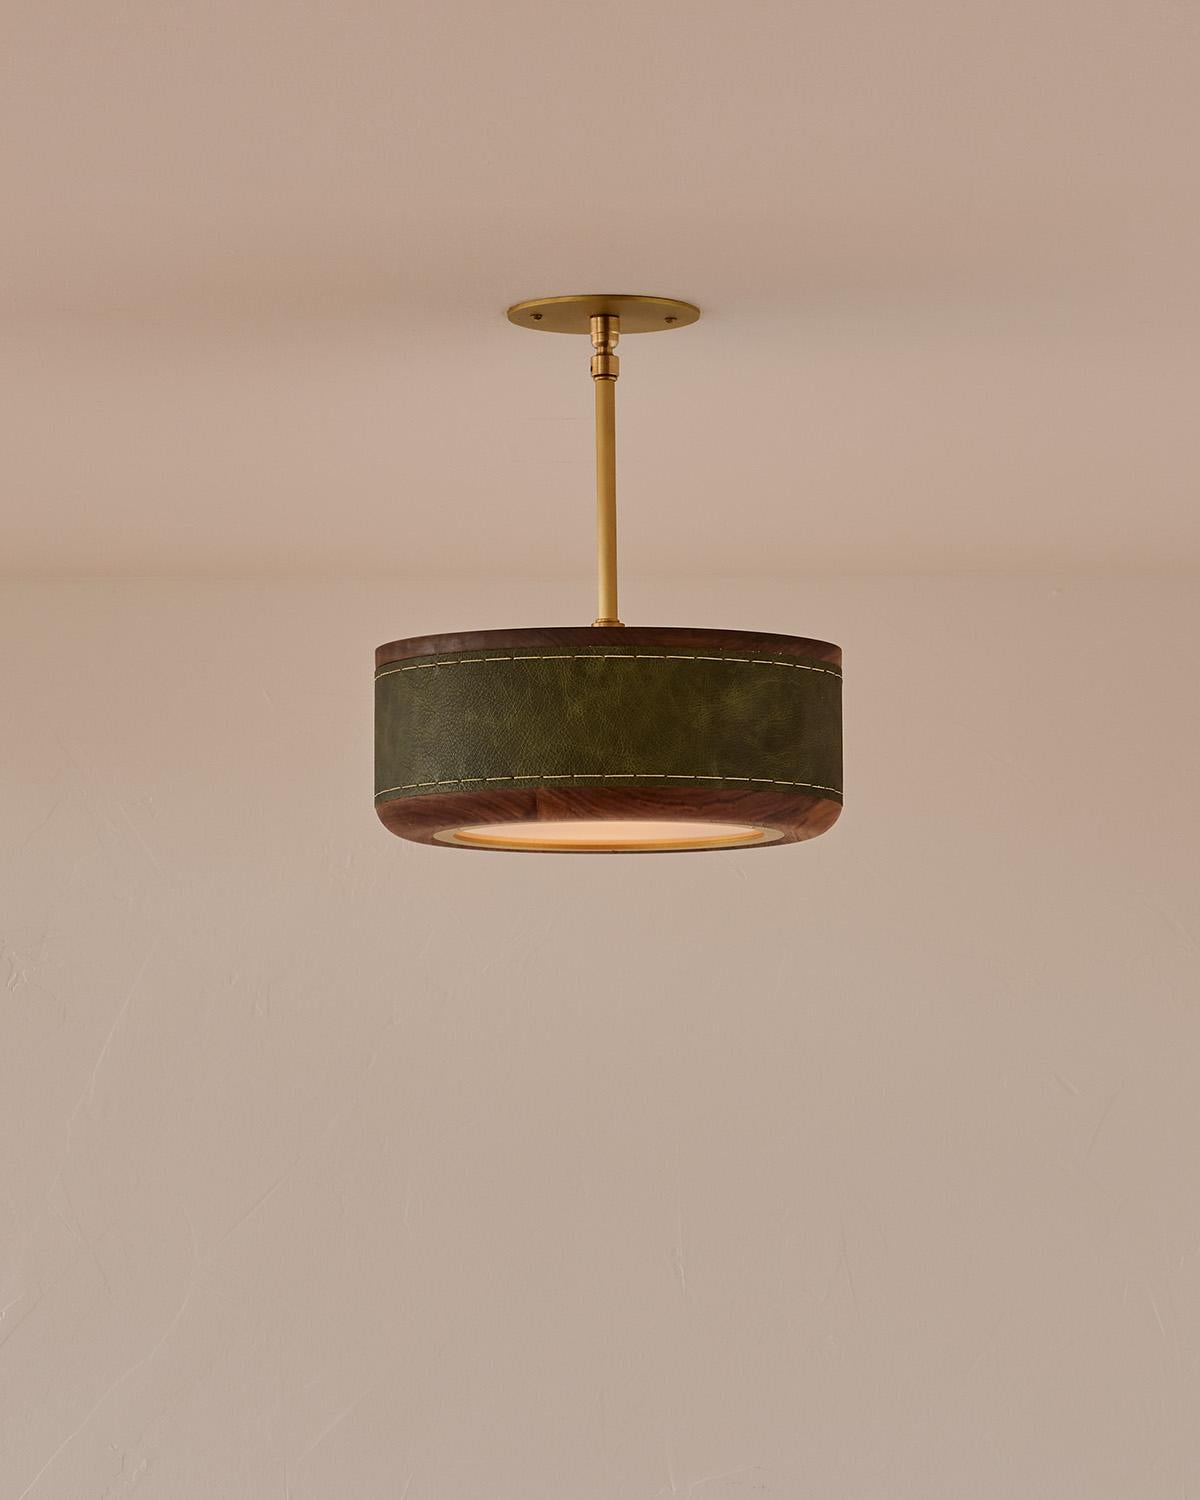 The Nura Ceiling Fixture combines hand-stitched leather over walnut accented by a brass pole and canopy. This fixture can either be hung as a ceiling surface mount or a pendant supported by a brass pole.

OVERALL DIMENSIONS
Shade: 12